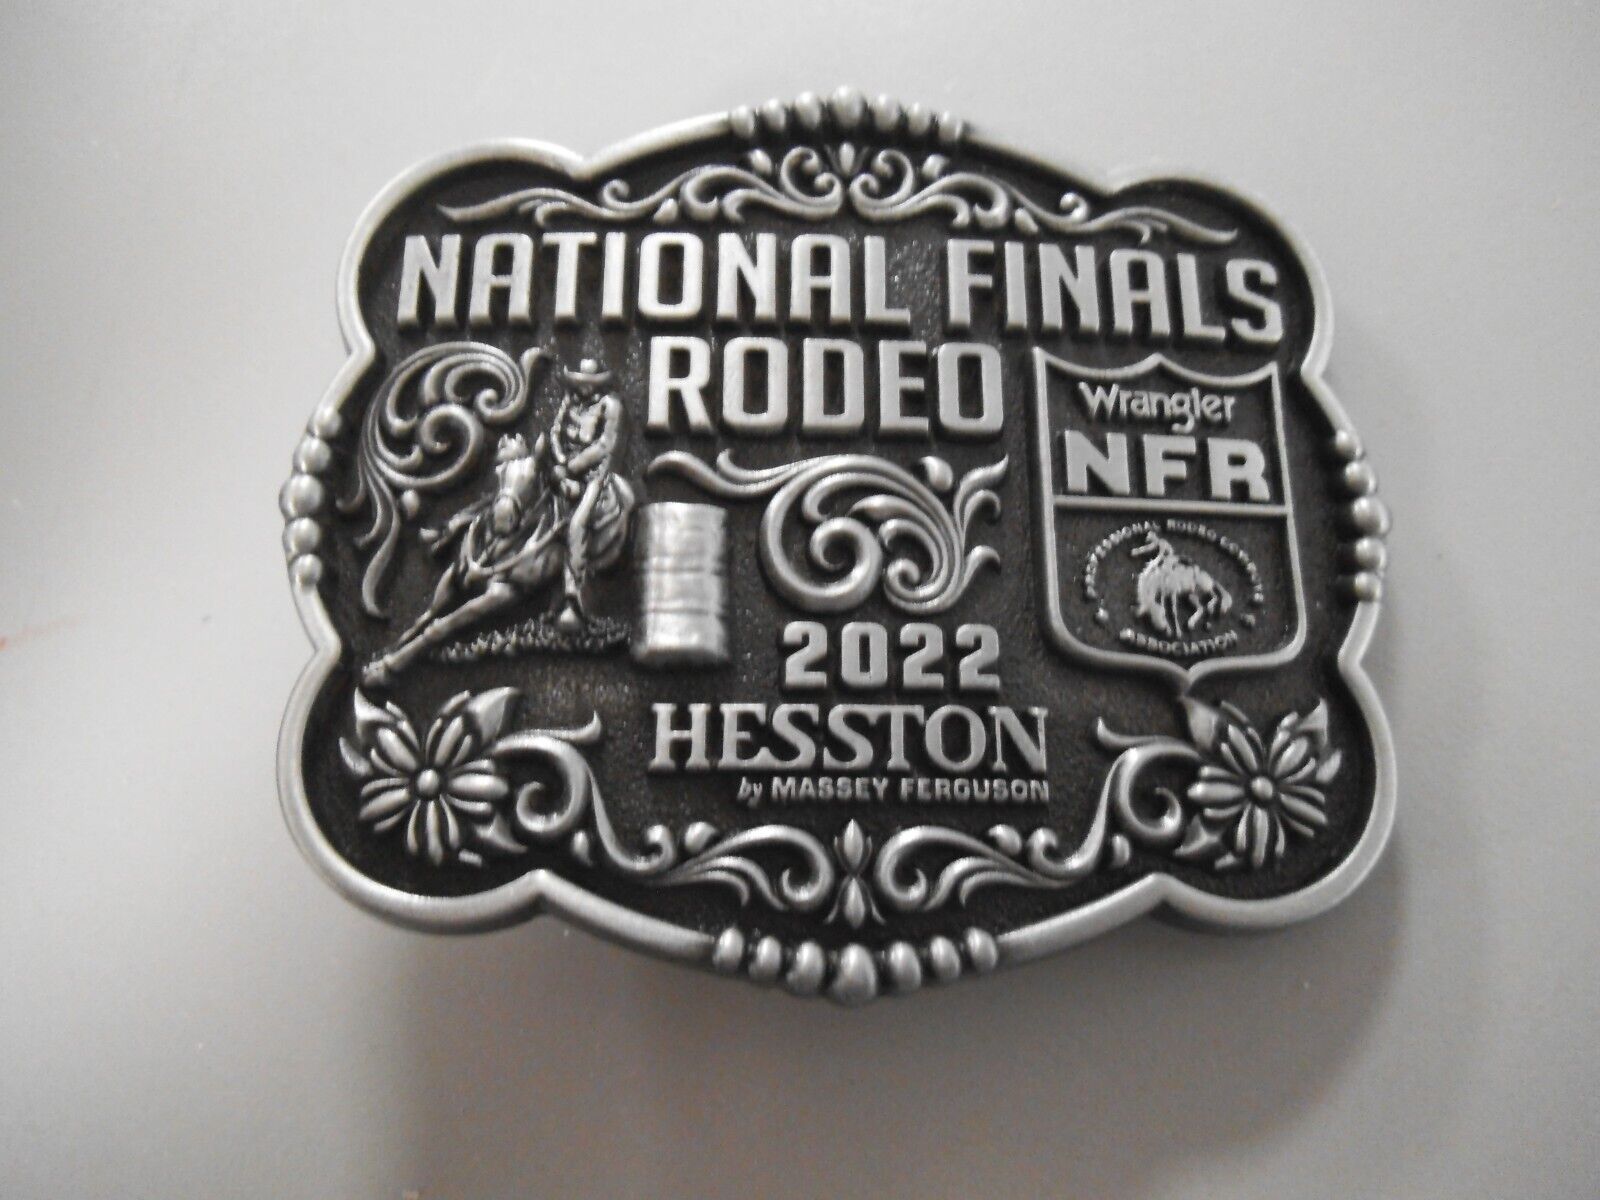 Hesston National Finals Rodeo 2022 Belt Buckle Adult size